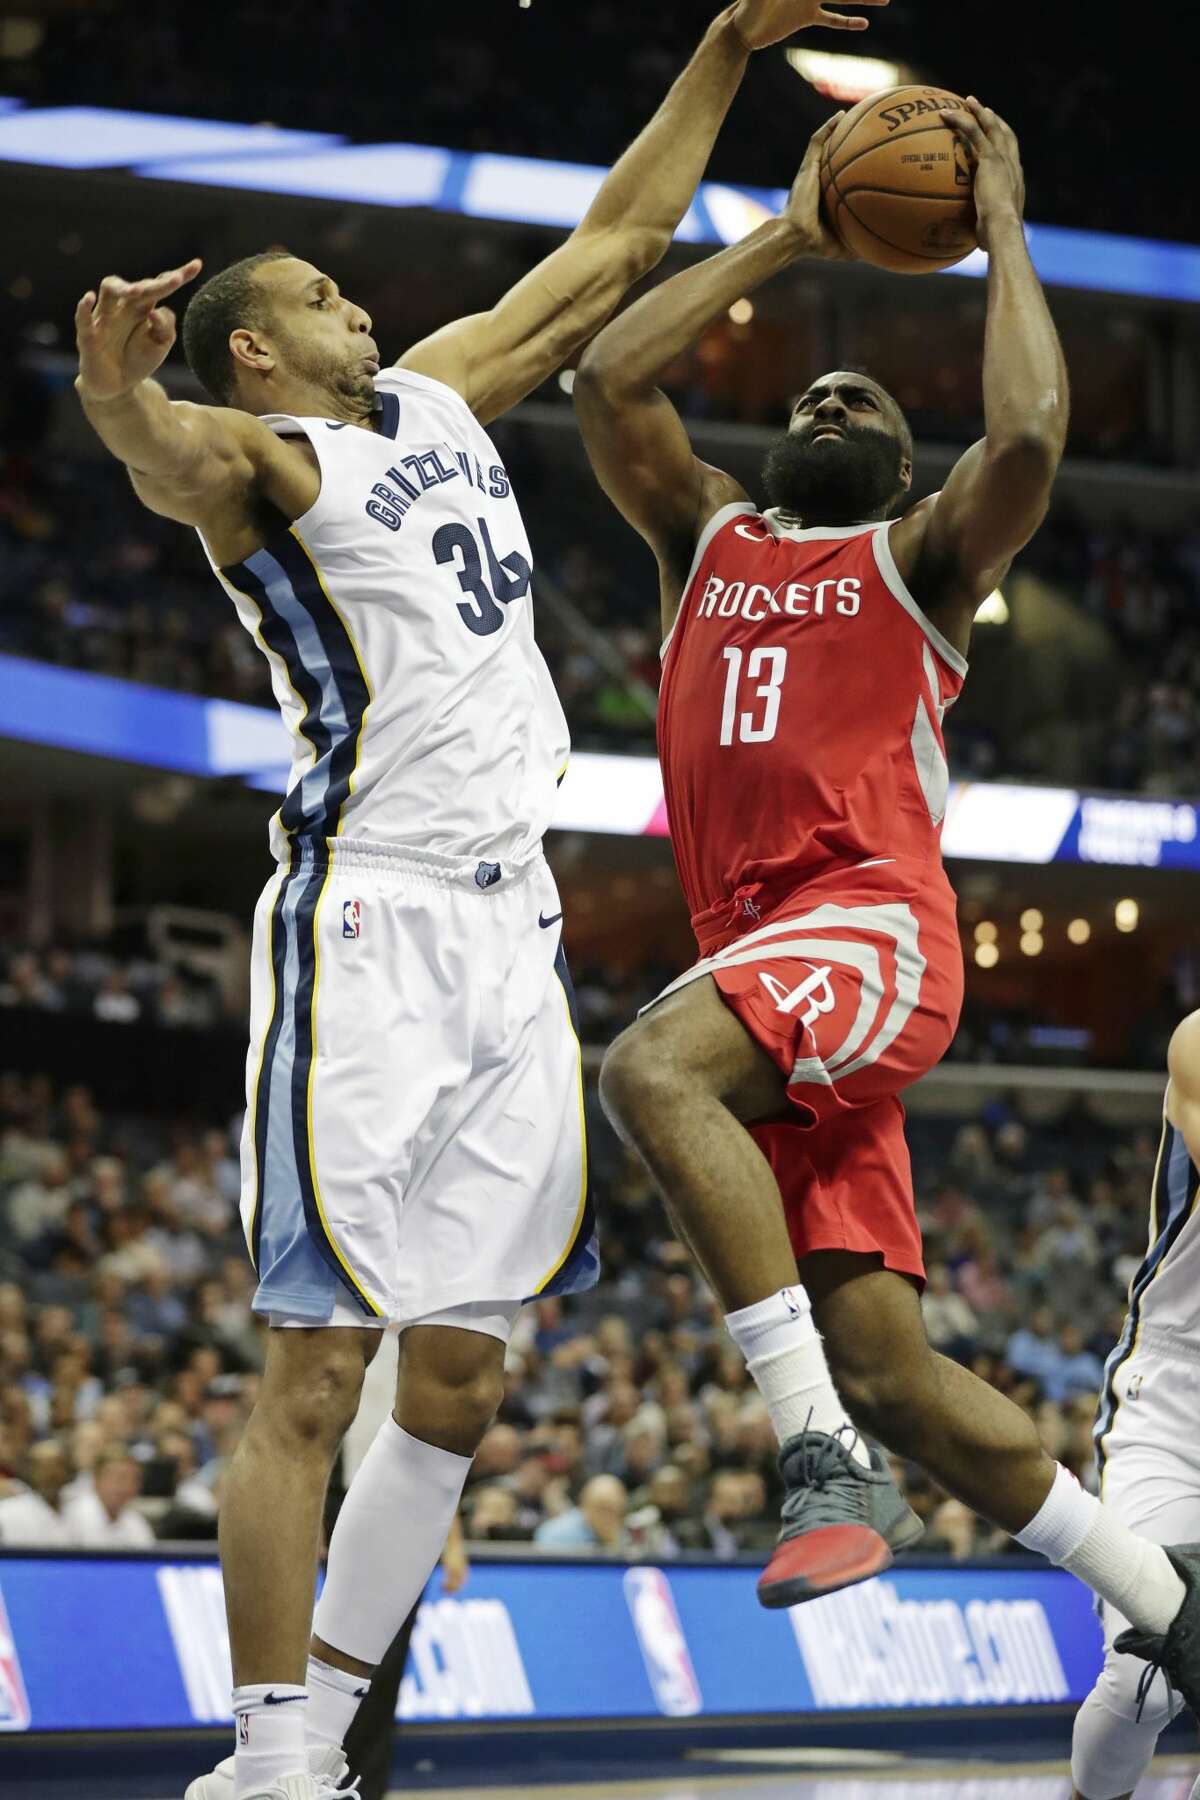 Memphis Grizzlies forward Brandan Wright (34) tries to block Houston Rockets guard James Harden (13) from a layup attempt in the first half of an NBA preseason basketball game on Wednesday, Oct. 11, 2017, in Memphis, Tenn. (AP Photo/Rogelio V. Solis)